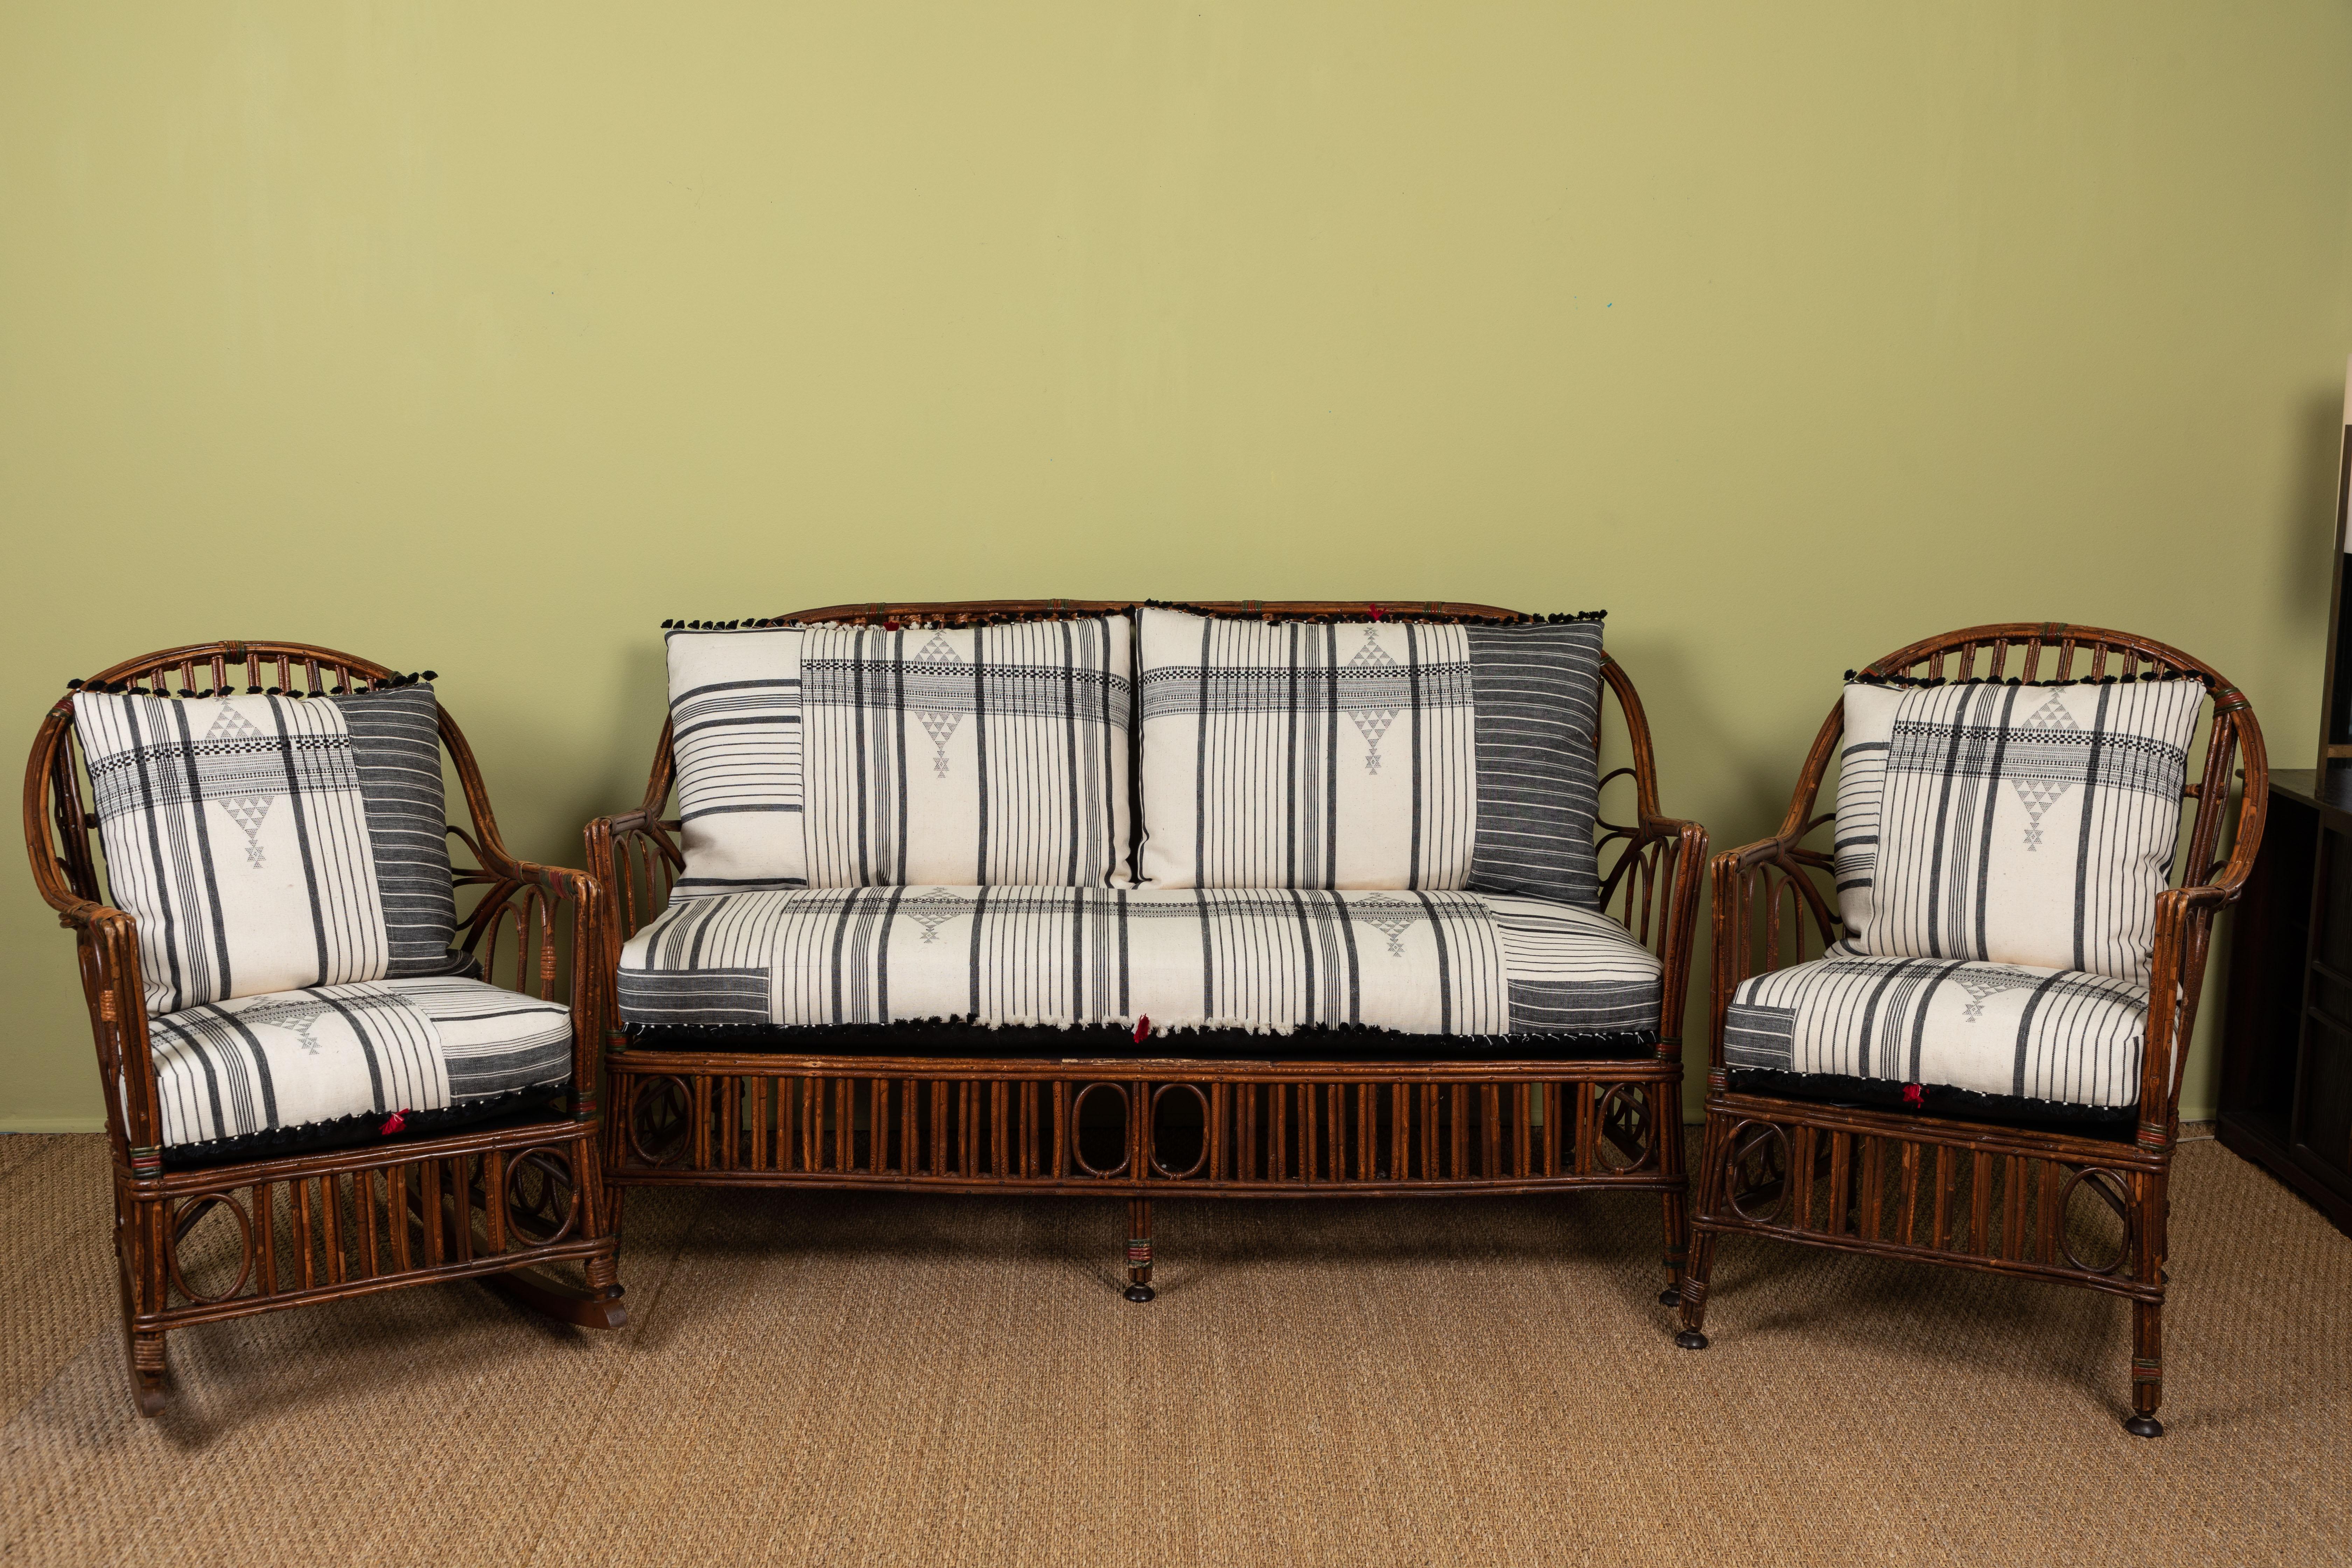 Classic East Coast Americana loveseat with cushions made of Injiri organic cotton textiles from India. Textile has areas of hand embroidery and hand tied tassels at edges. Part of a set with rocker and but can be purchased individually.